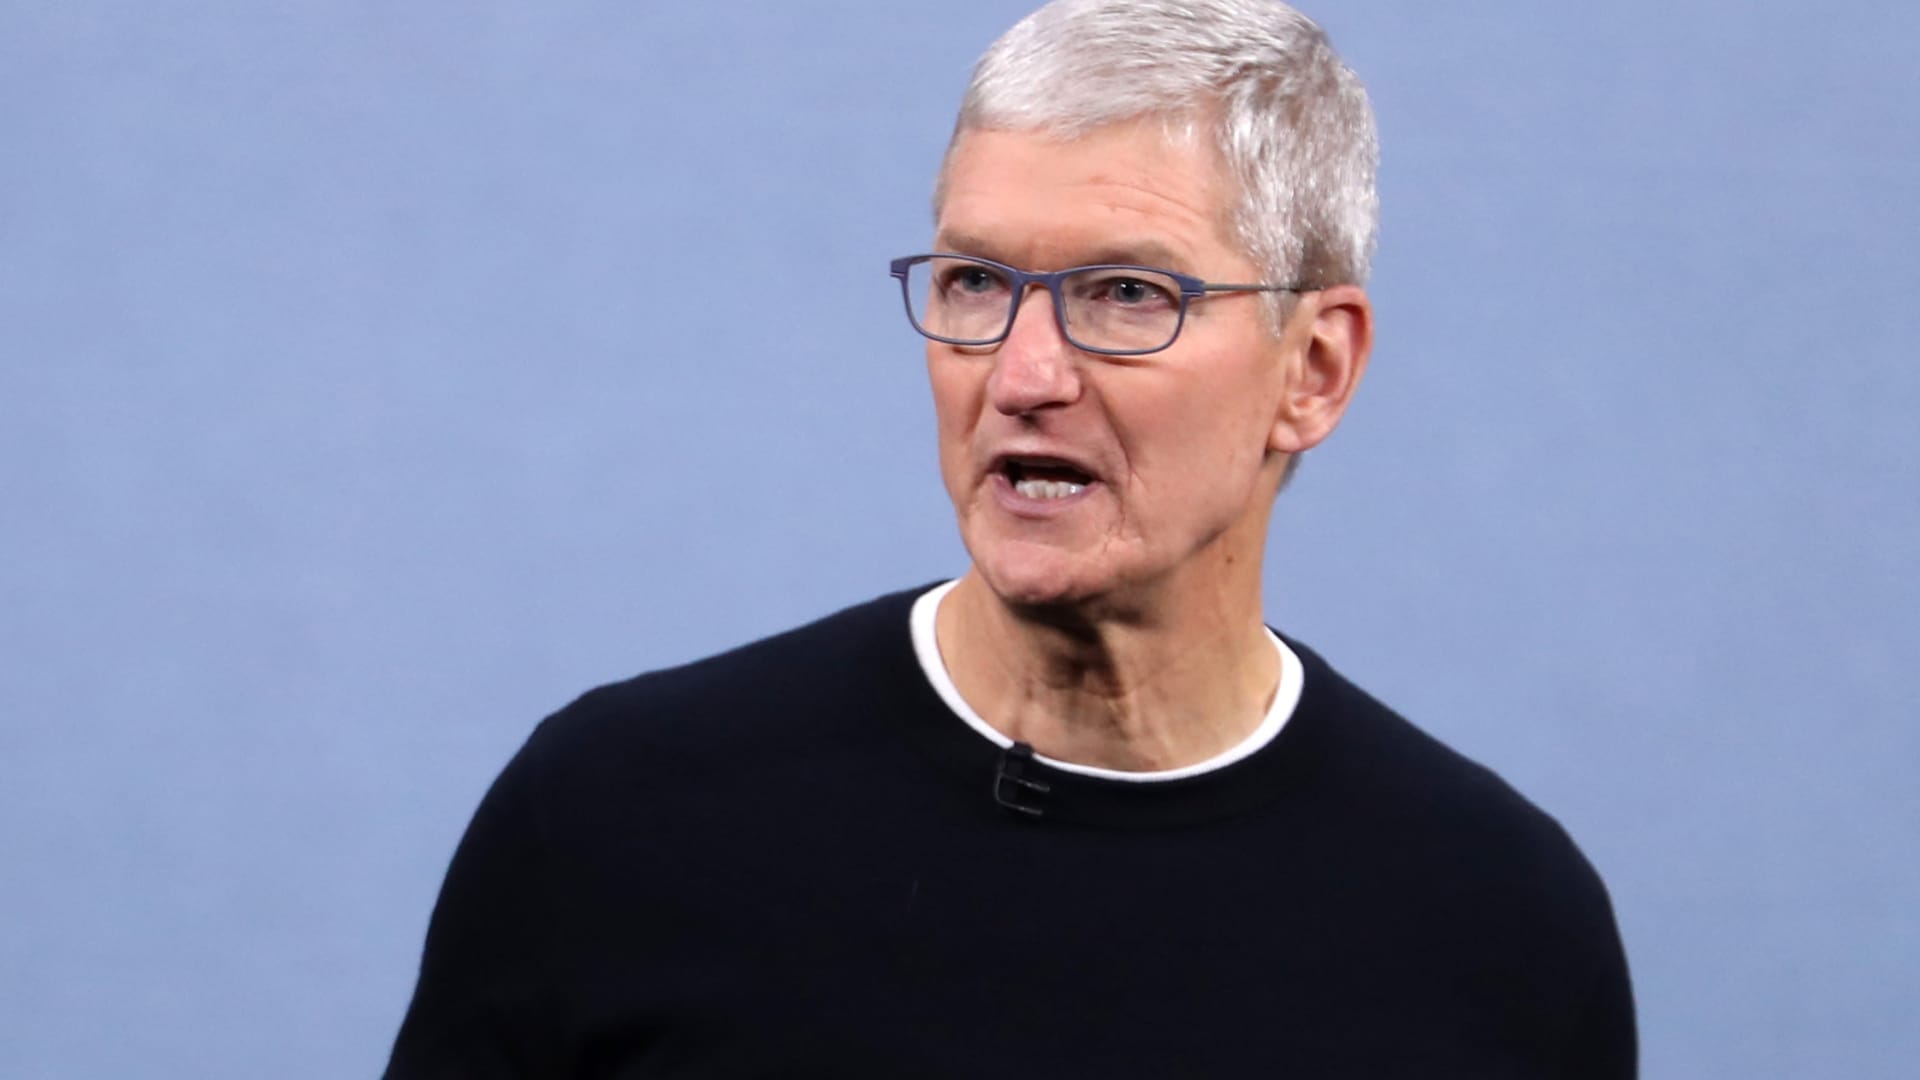 Apple has quietly dropped 22% from its peak, giving up $500 billion in market cap